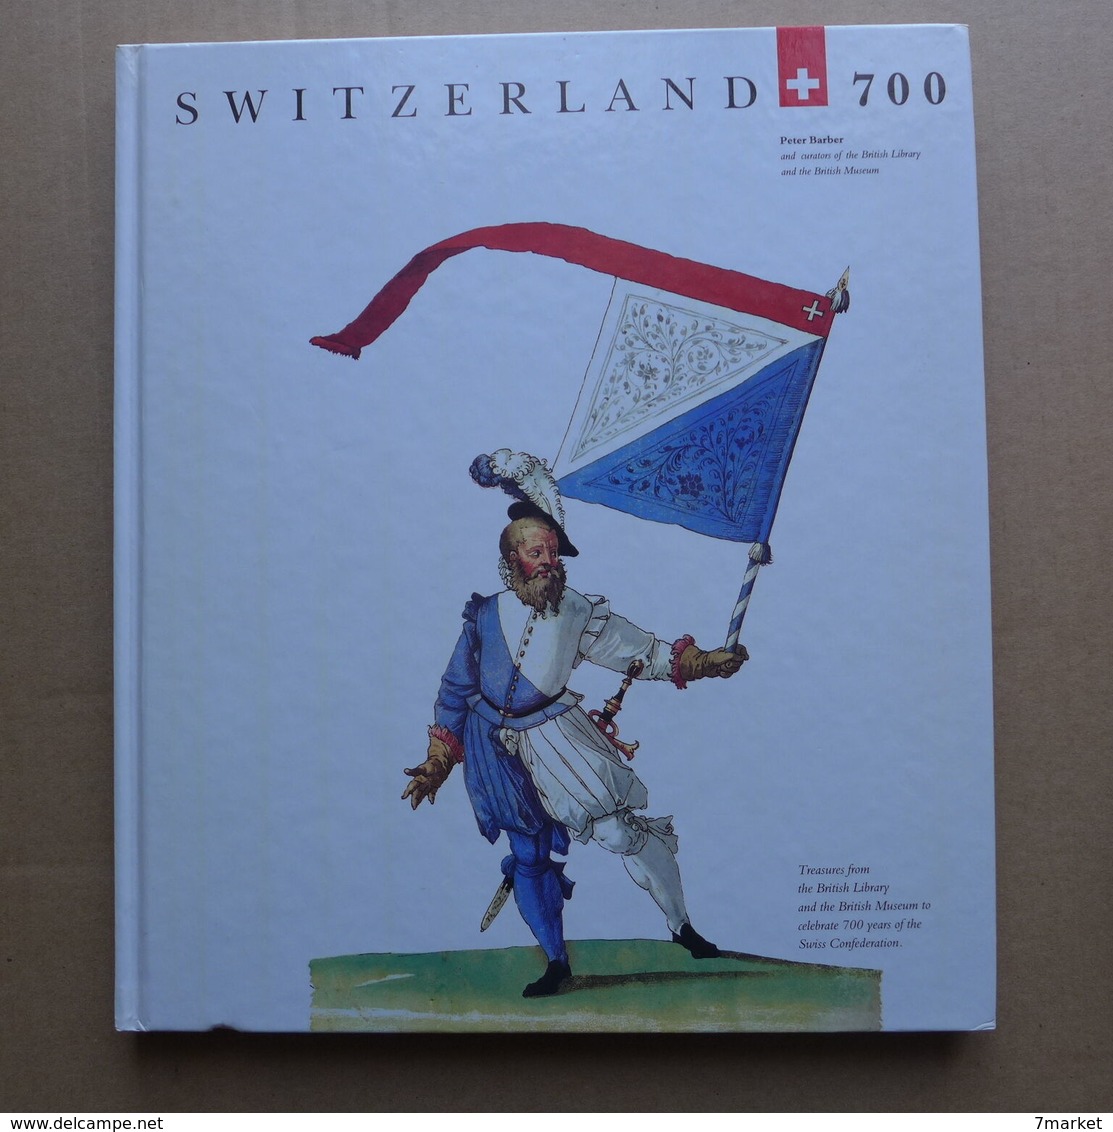 Peter Barber - Switzerland 700 (Suisse) / 1991- éd. The British Library - Europe